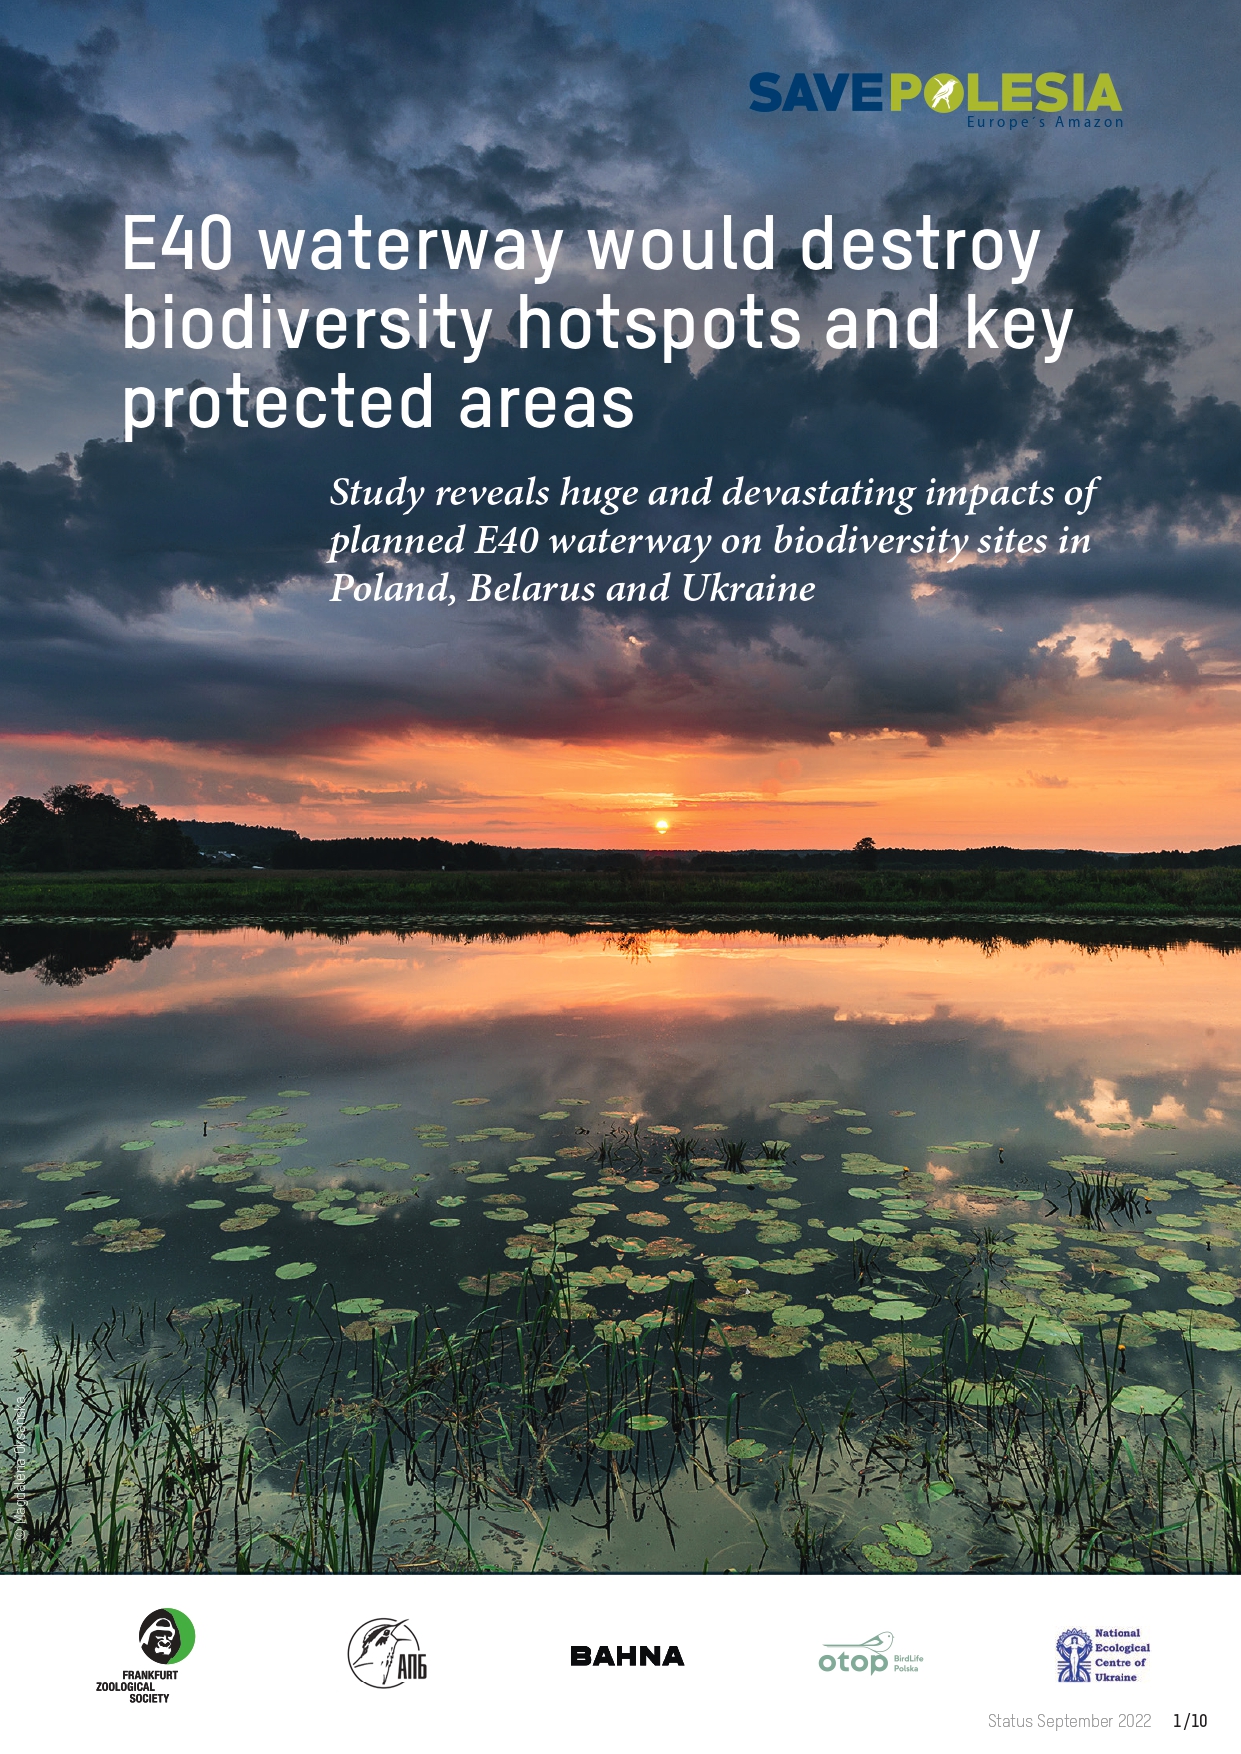 E40 waterway would destroy biodiversity hotspots and key protected areas